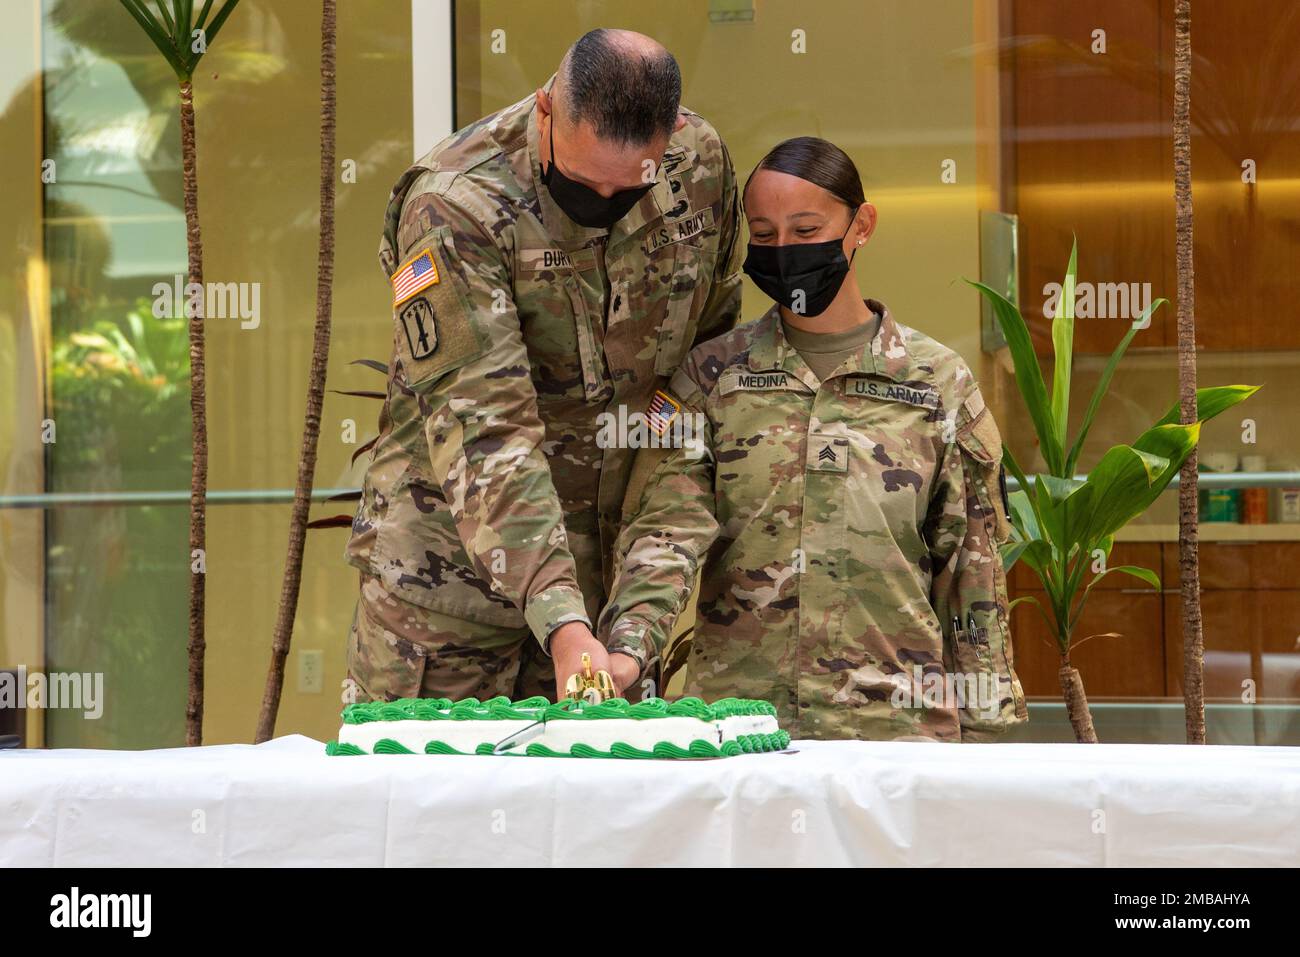 Lt. Col.Alex Duran and Sgt. Janice Medina, the oldest and youngest soldier attached to the Defense POW/MIA Accounting Agency cut the cake in a ceremony for the 247th Army birthday at the DPAA Facility on Joint Base Pearl Harbor-Hickam, Hawaii, June 14, 2022. The ceremony was held to commemorate the Army birthday honoring 247 years of rich history and defense of the nation. DPAA's mission is to achieve the fullest possible accounting for missing and unaccounted for U.S. personnel to their families and our nation. Stock Photo